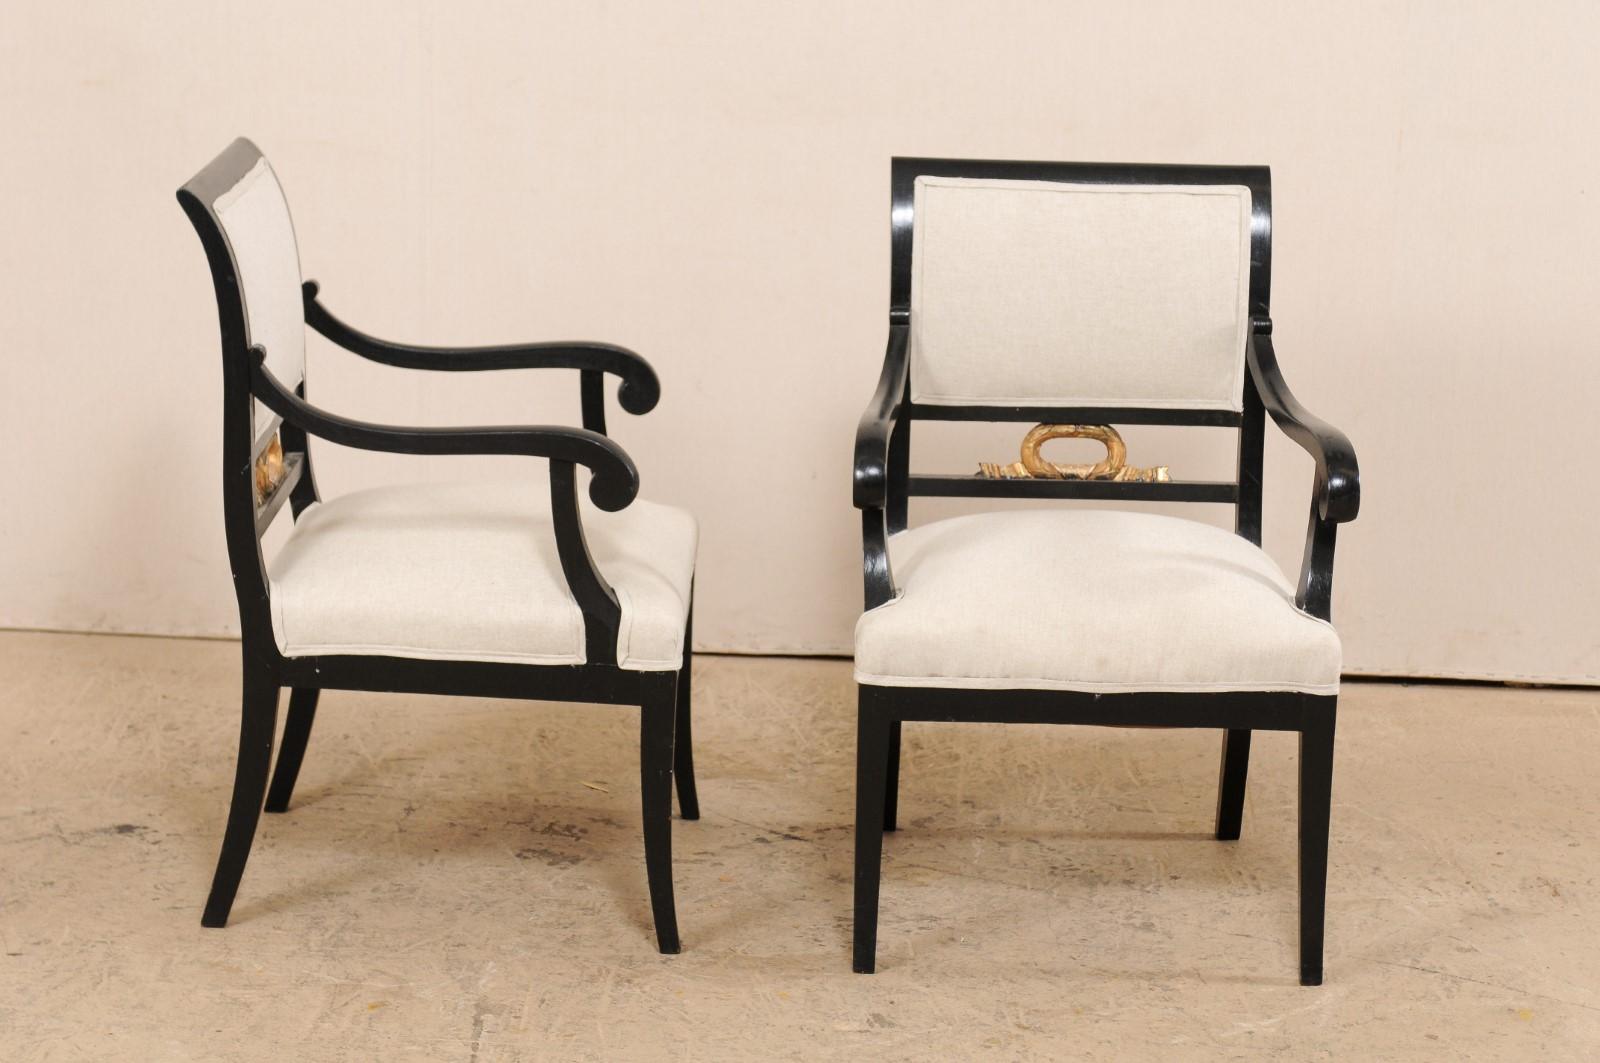 Pair of Swedish Empire Armchairs in Black w/Gold Accents from the Mid-19th C. For Sale 5